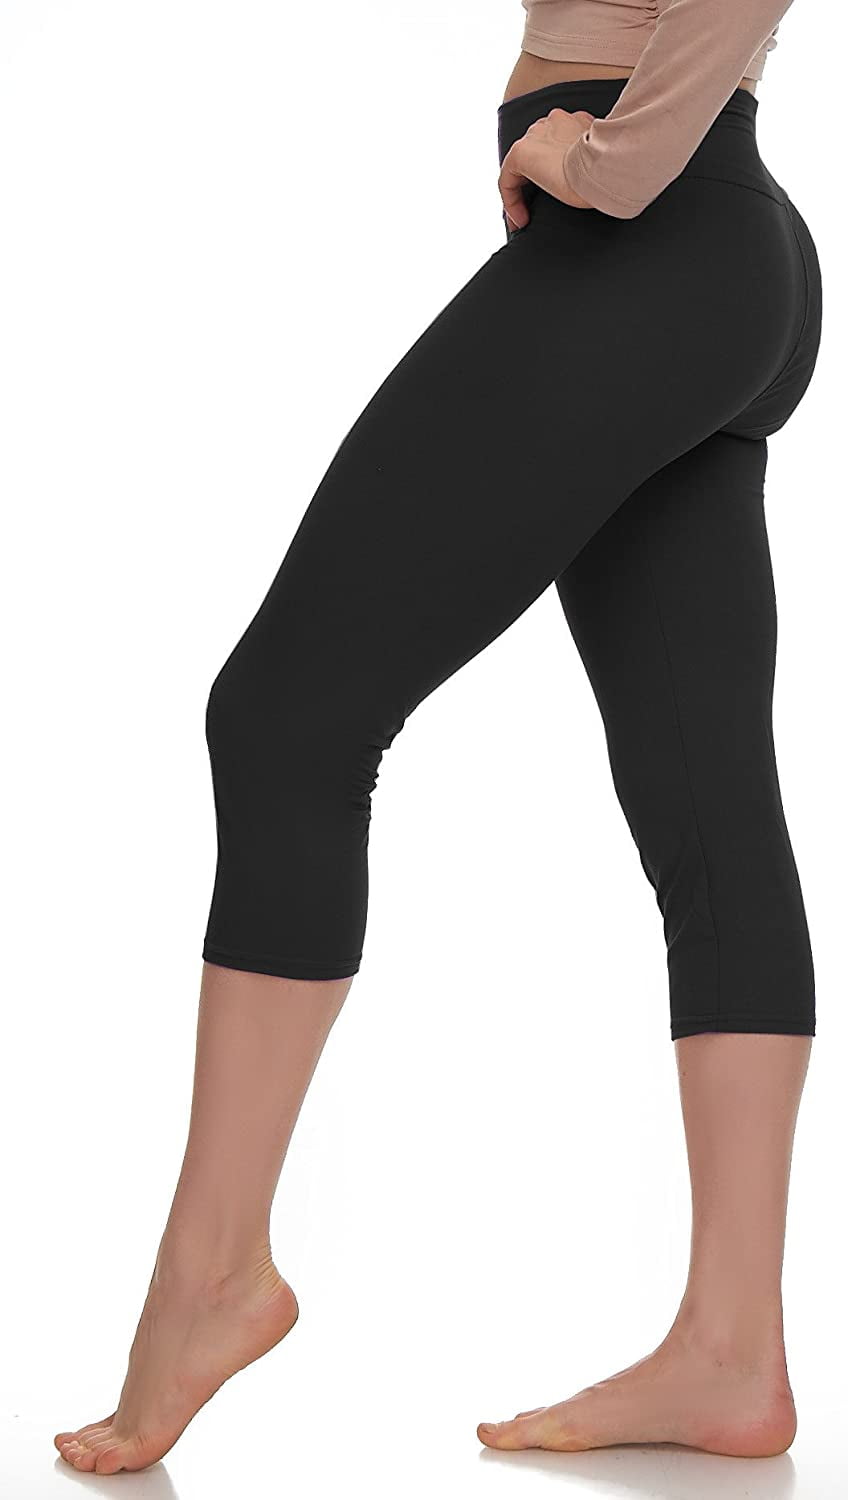 NEW W/TAGS*ONE SIZE FITS SMALL,MED,LARGE*BUTTER SOFT CAPRI YOGA WAIST LEGGINGS 